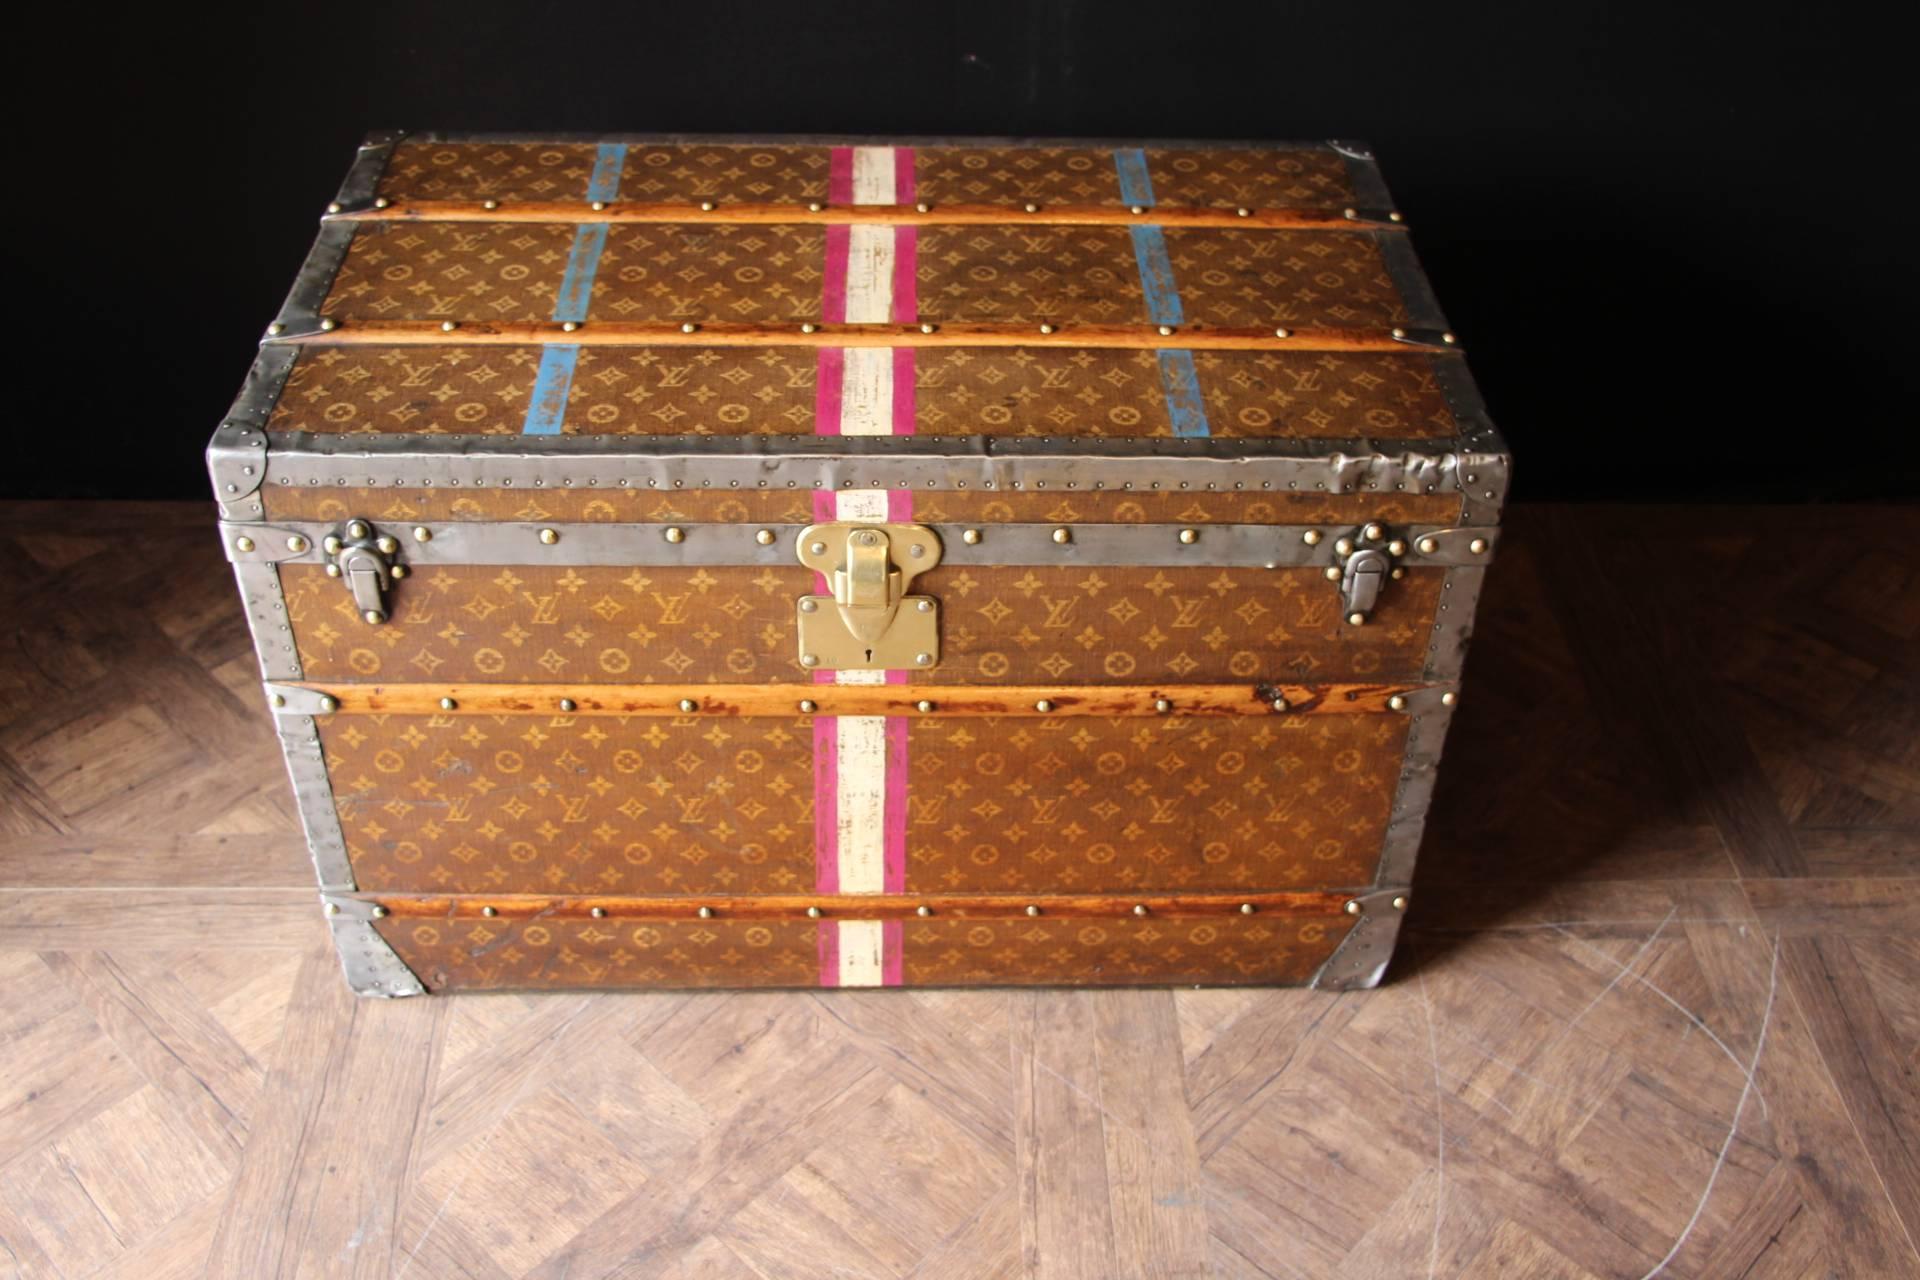 This is a superb Louis Vuitton steamer trunk, large size, rare and sought after Tisse' monogram canvas, metal bound with brass studs, reinforced with wooden laths,  wheels to the base and metal handles to either end, interior lined with cream